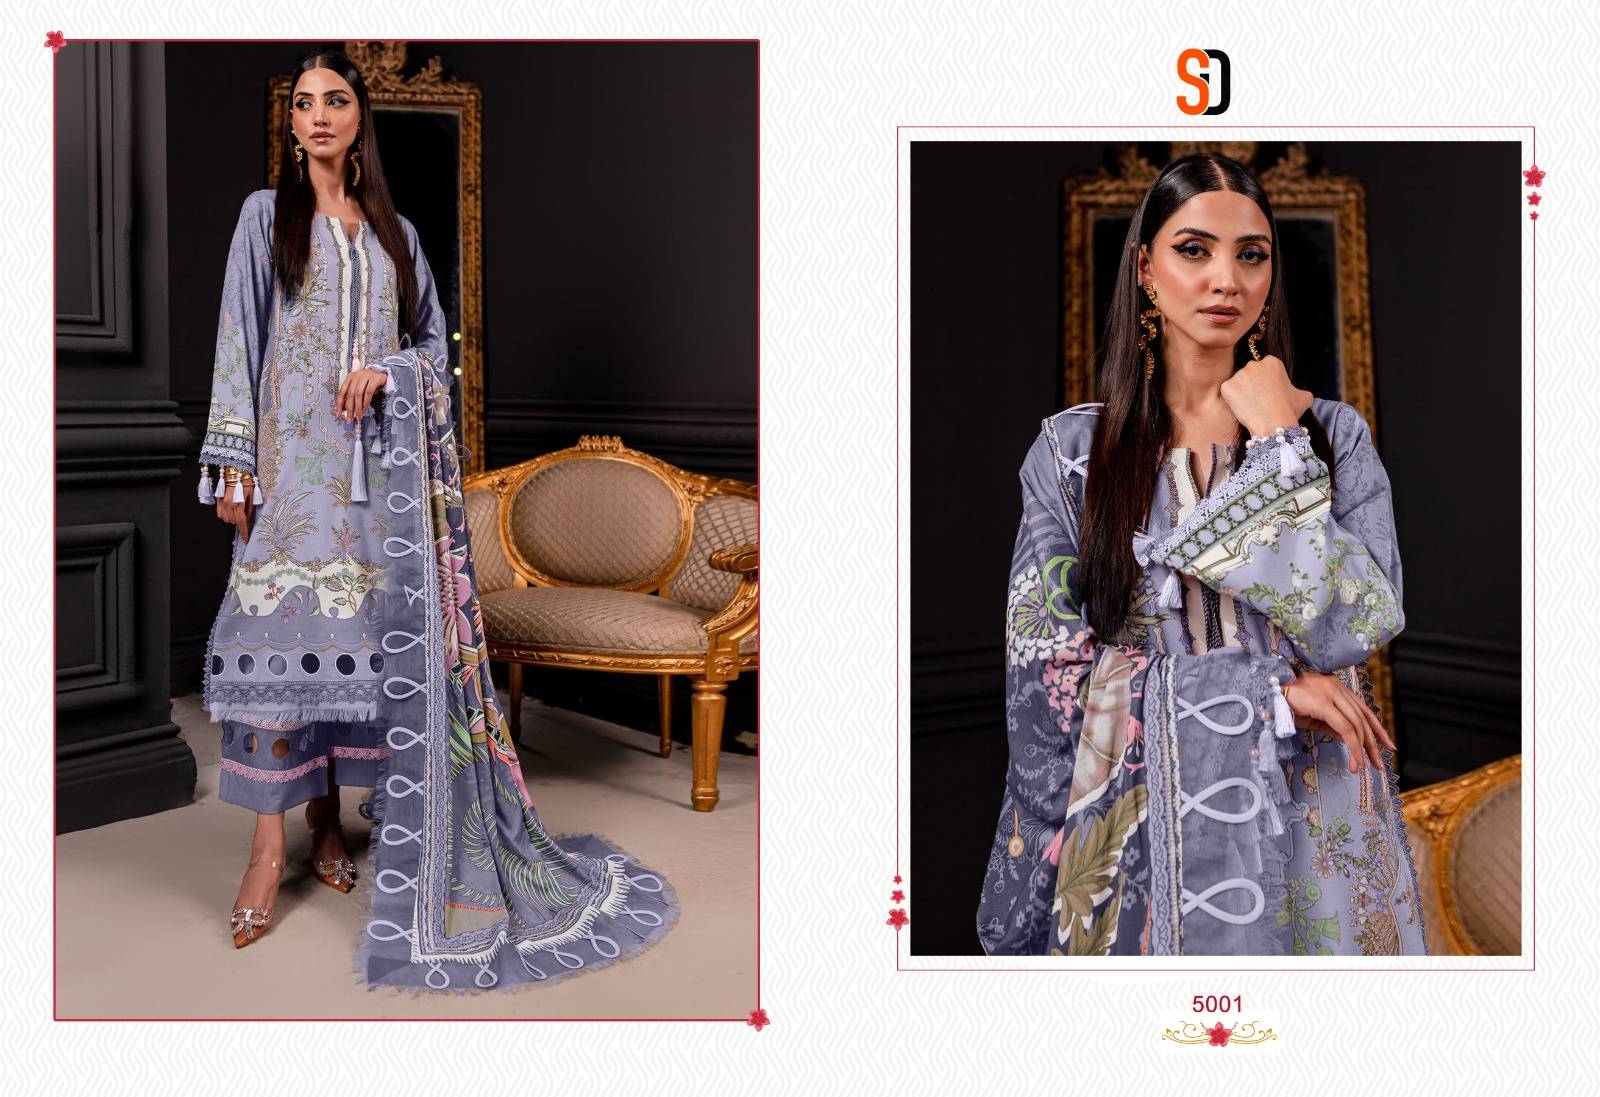 Bliss Vol-5 By Shraddha Designer 5001 To 5006 Series Beautiful Festive Suits Colorful Stylish Fancy Casual Wear & Ethnic Wear Lawn Cotton Embroidered Dresses At Wholesale Price